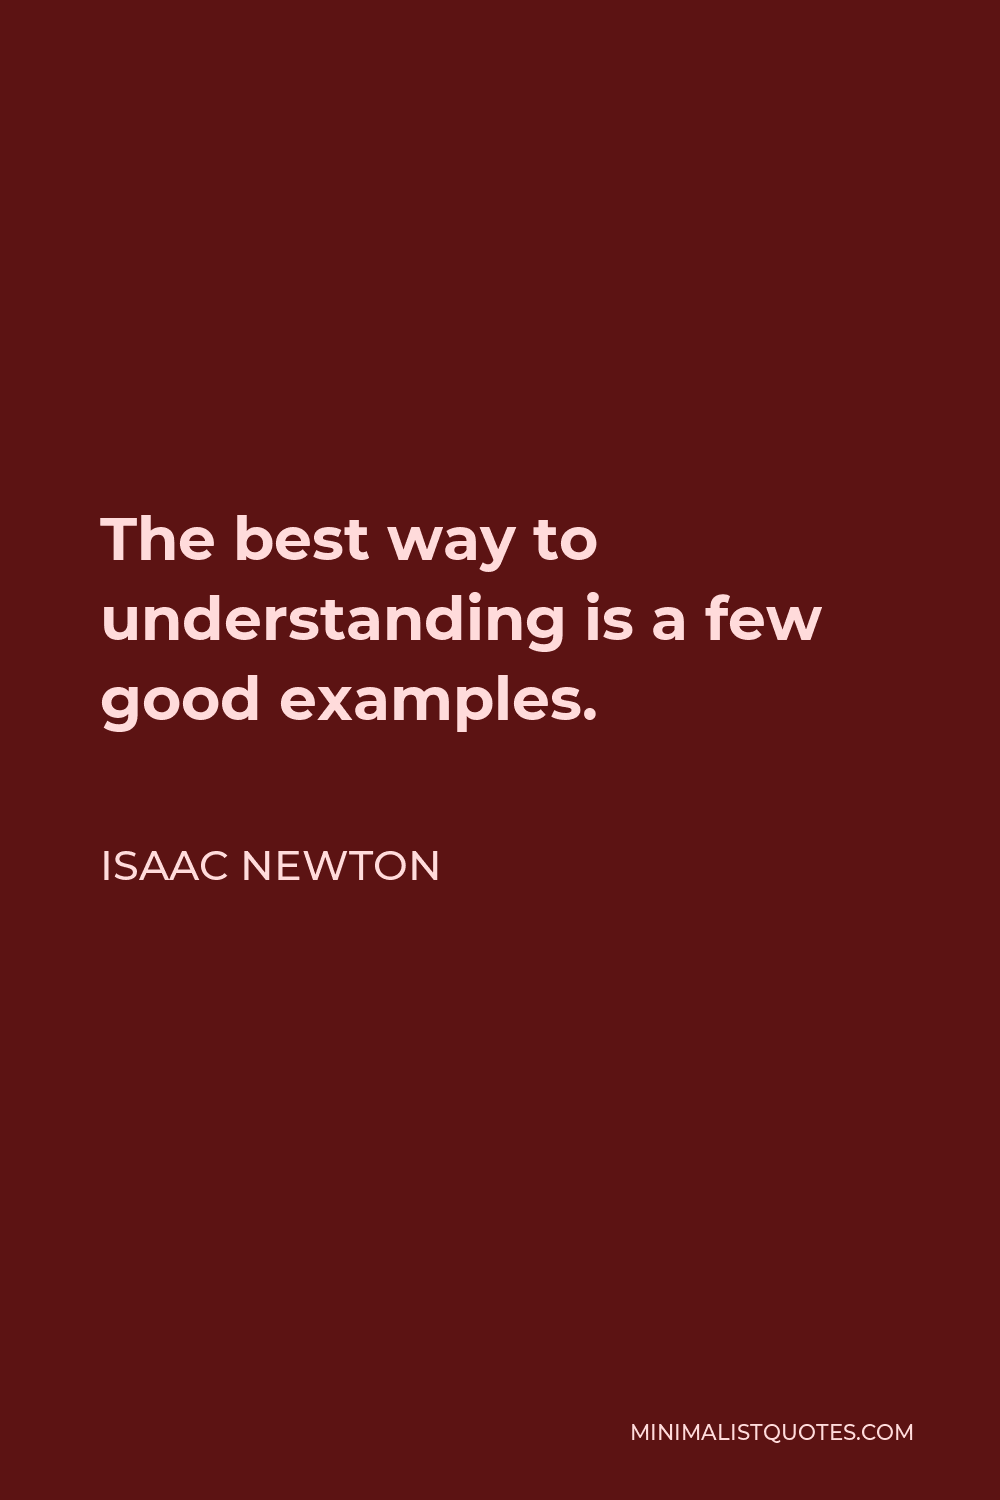 Isaac Newton Quote - The best way to understanding is a few good examples.